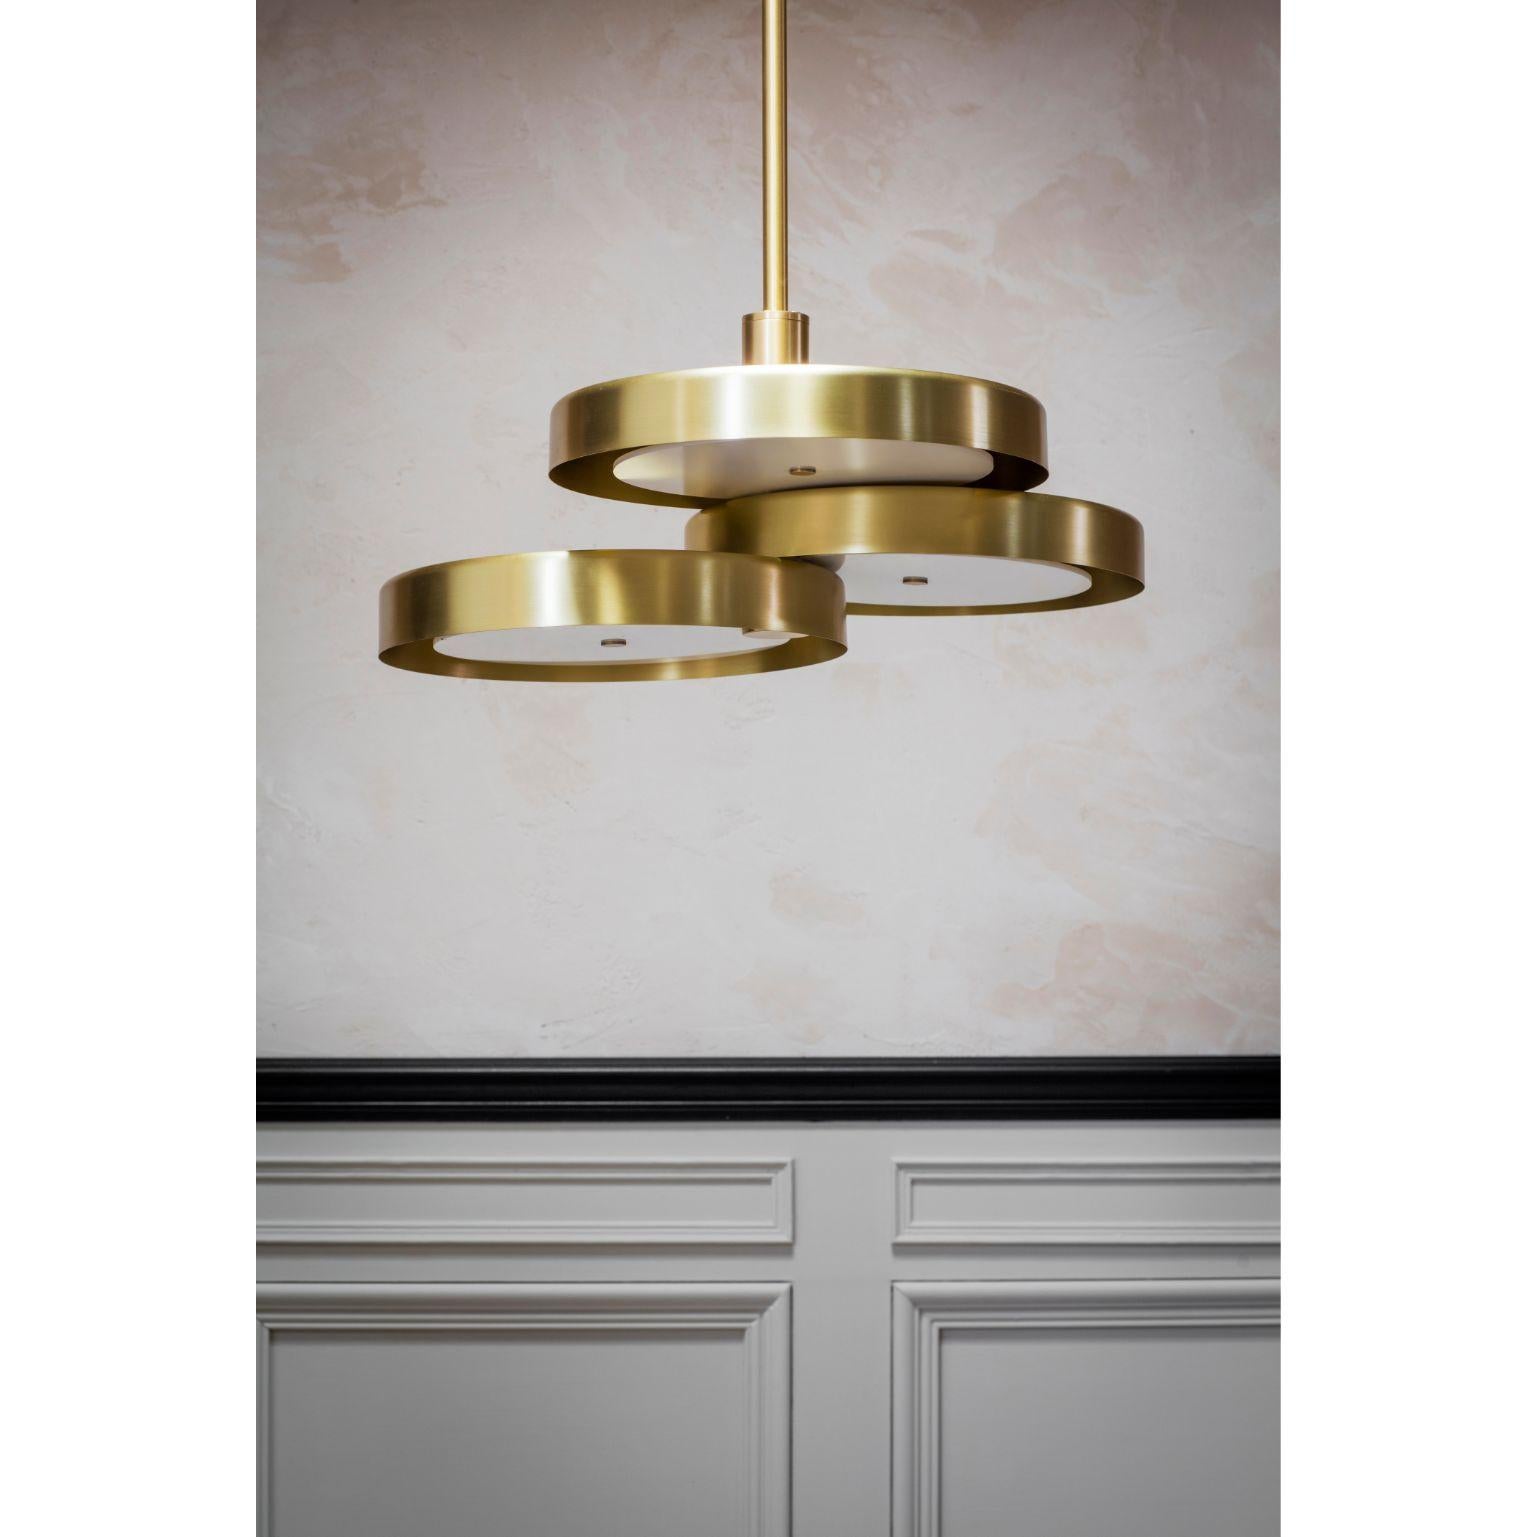 Triarc pendant light white by Bert Frank
Dimensions: 25 x 62 cm
Materials: Brass, acrylic

Available with opal or black diffusers.

Three intersecting brass discs hang from a single drop rod. Grouped together with two or more pendants – a trio of